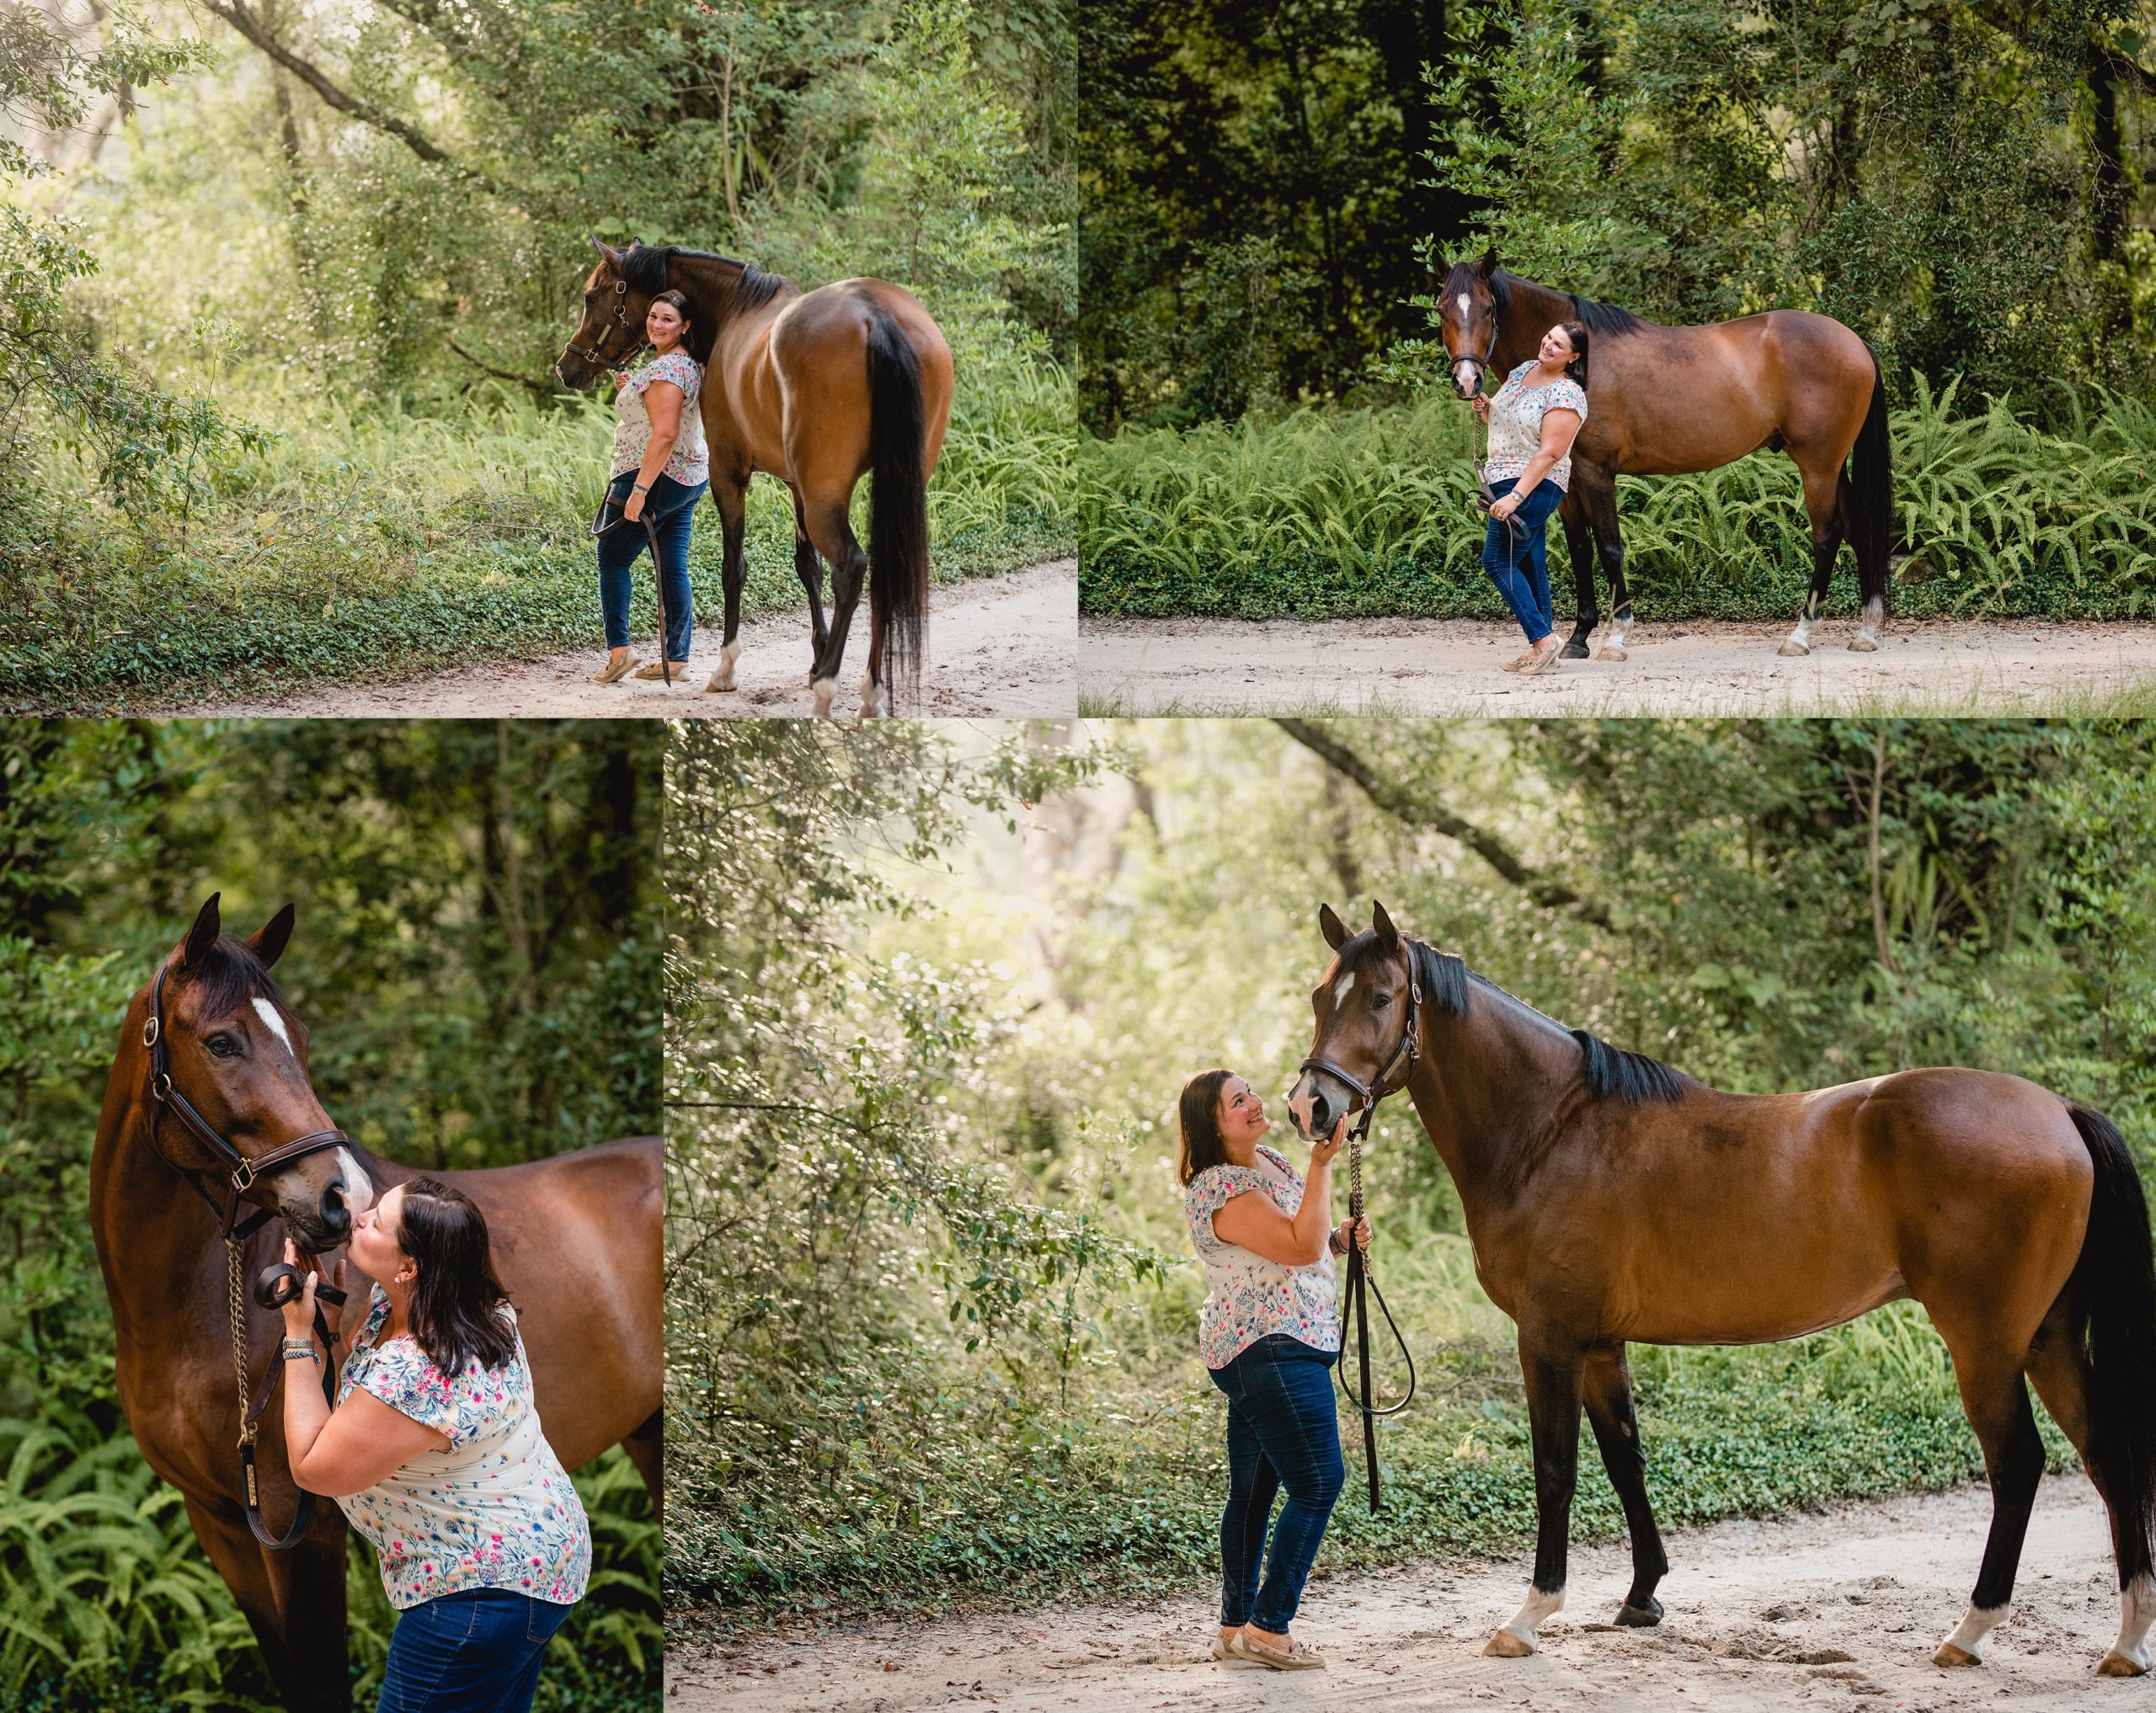 Horse photographer specializing in the bond between horse and rider.